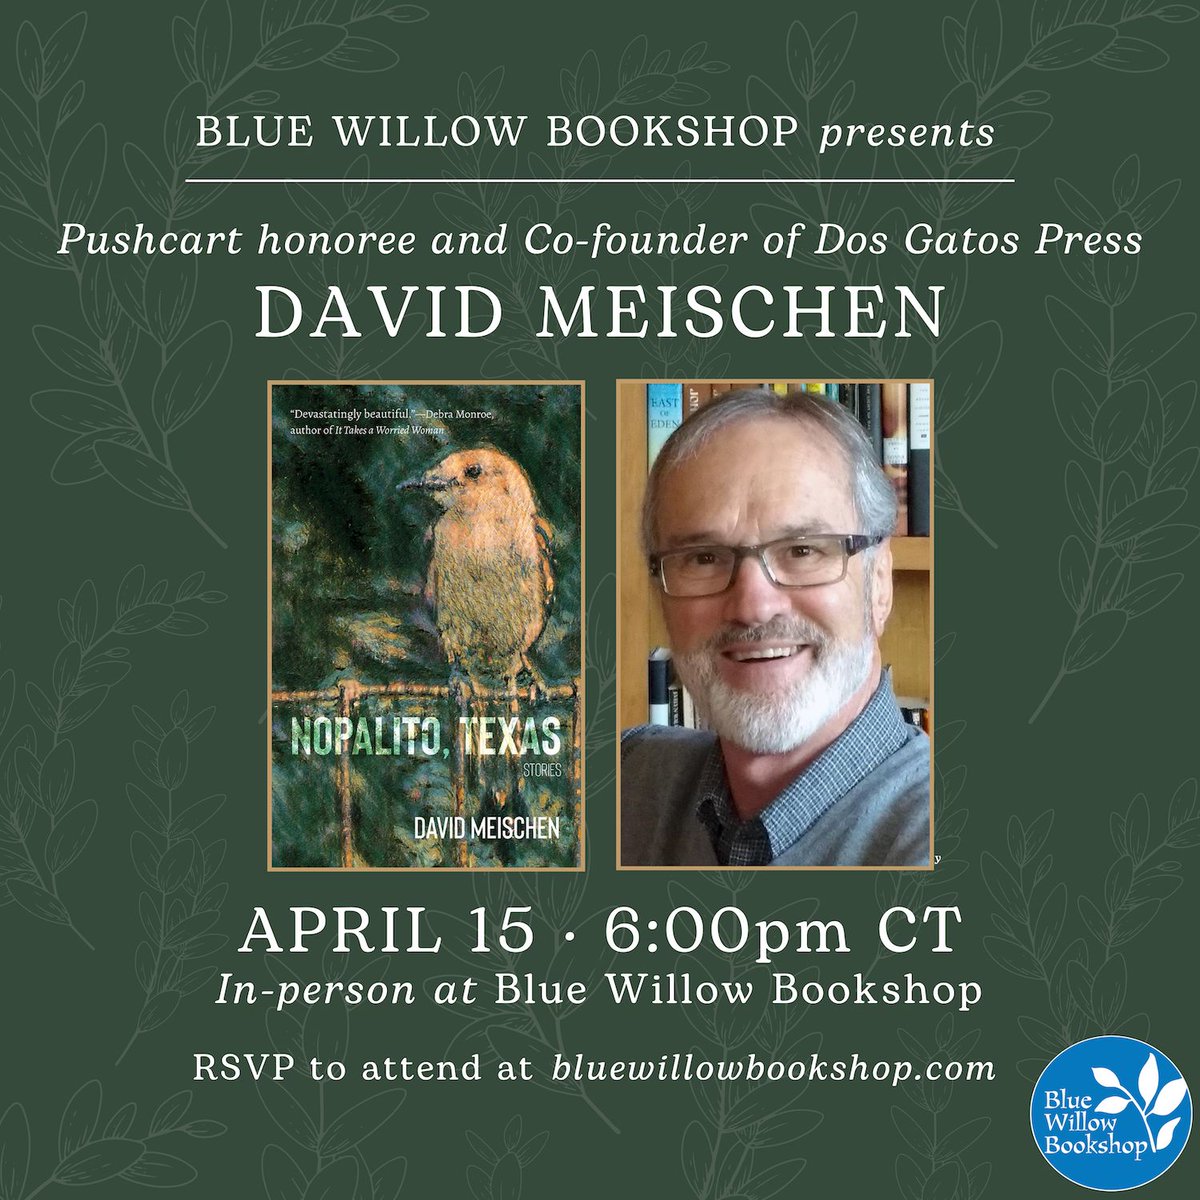 Tomorrow, don't miss our event with Pushcart honoree & award-winning author David Meischen, celebrating his debut story collection, NOPALITO, TEXAS. ⭐️

You can reserve your book and RSVP here—we look forward to seeing you there! bluewillowbookshop.com/event/meischen… @meischen1948 @UNMPress